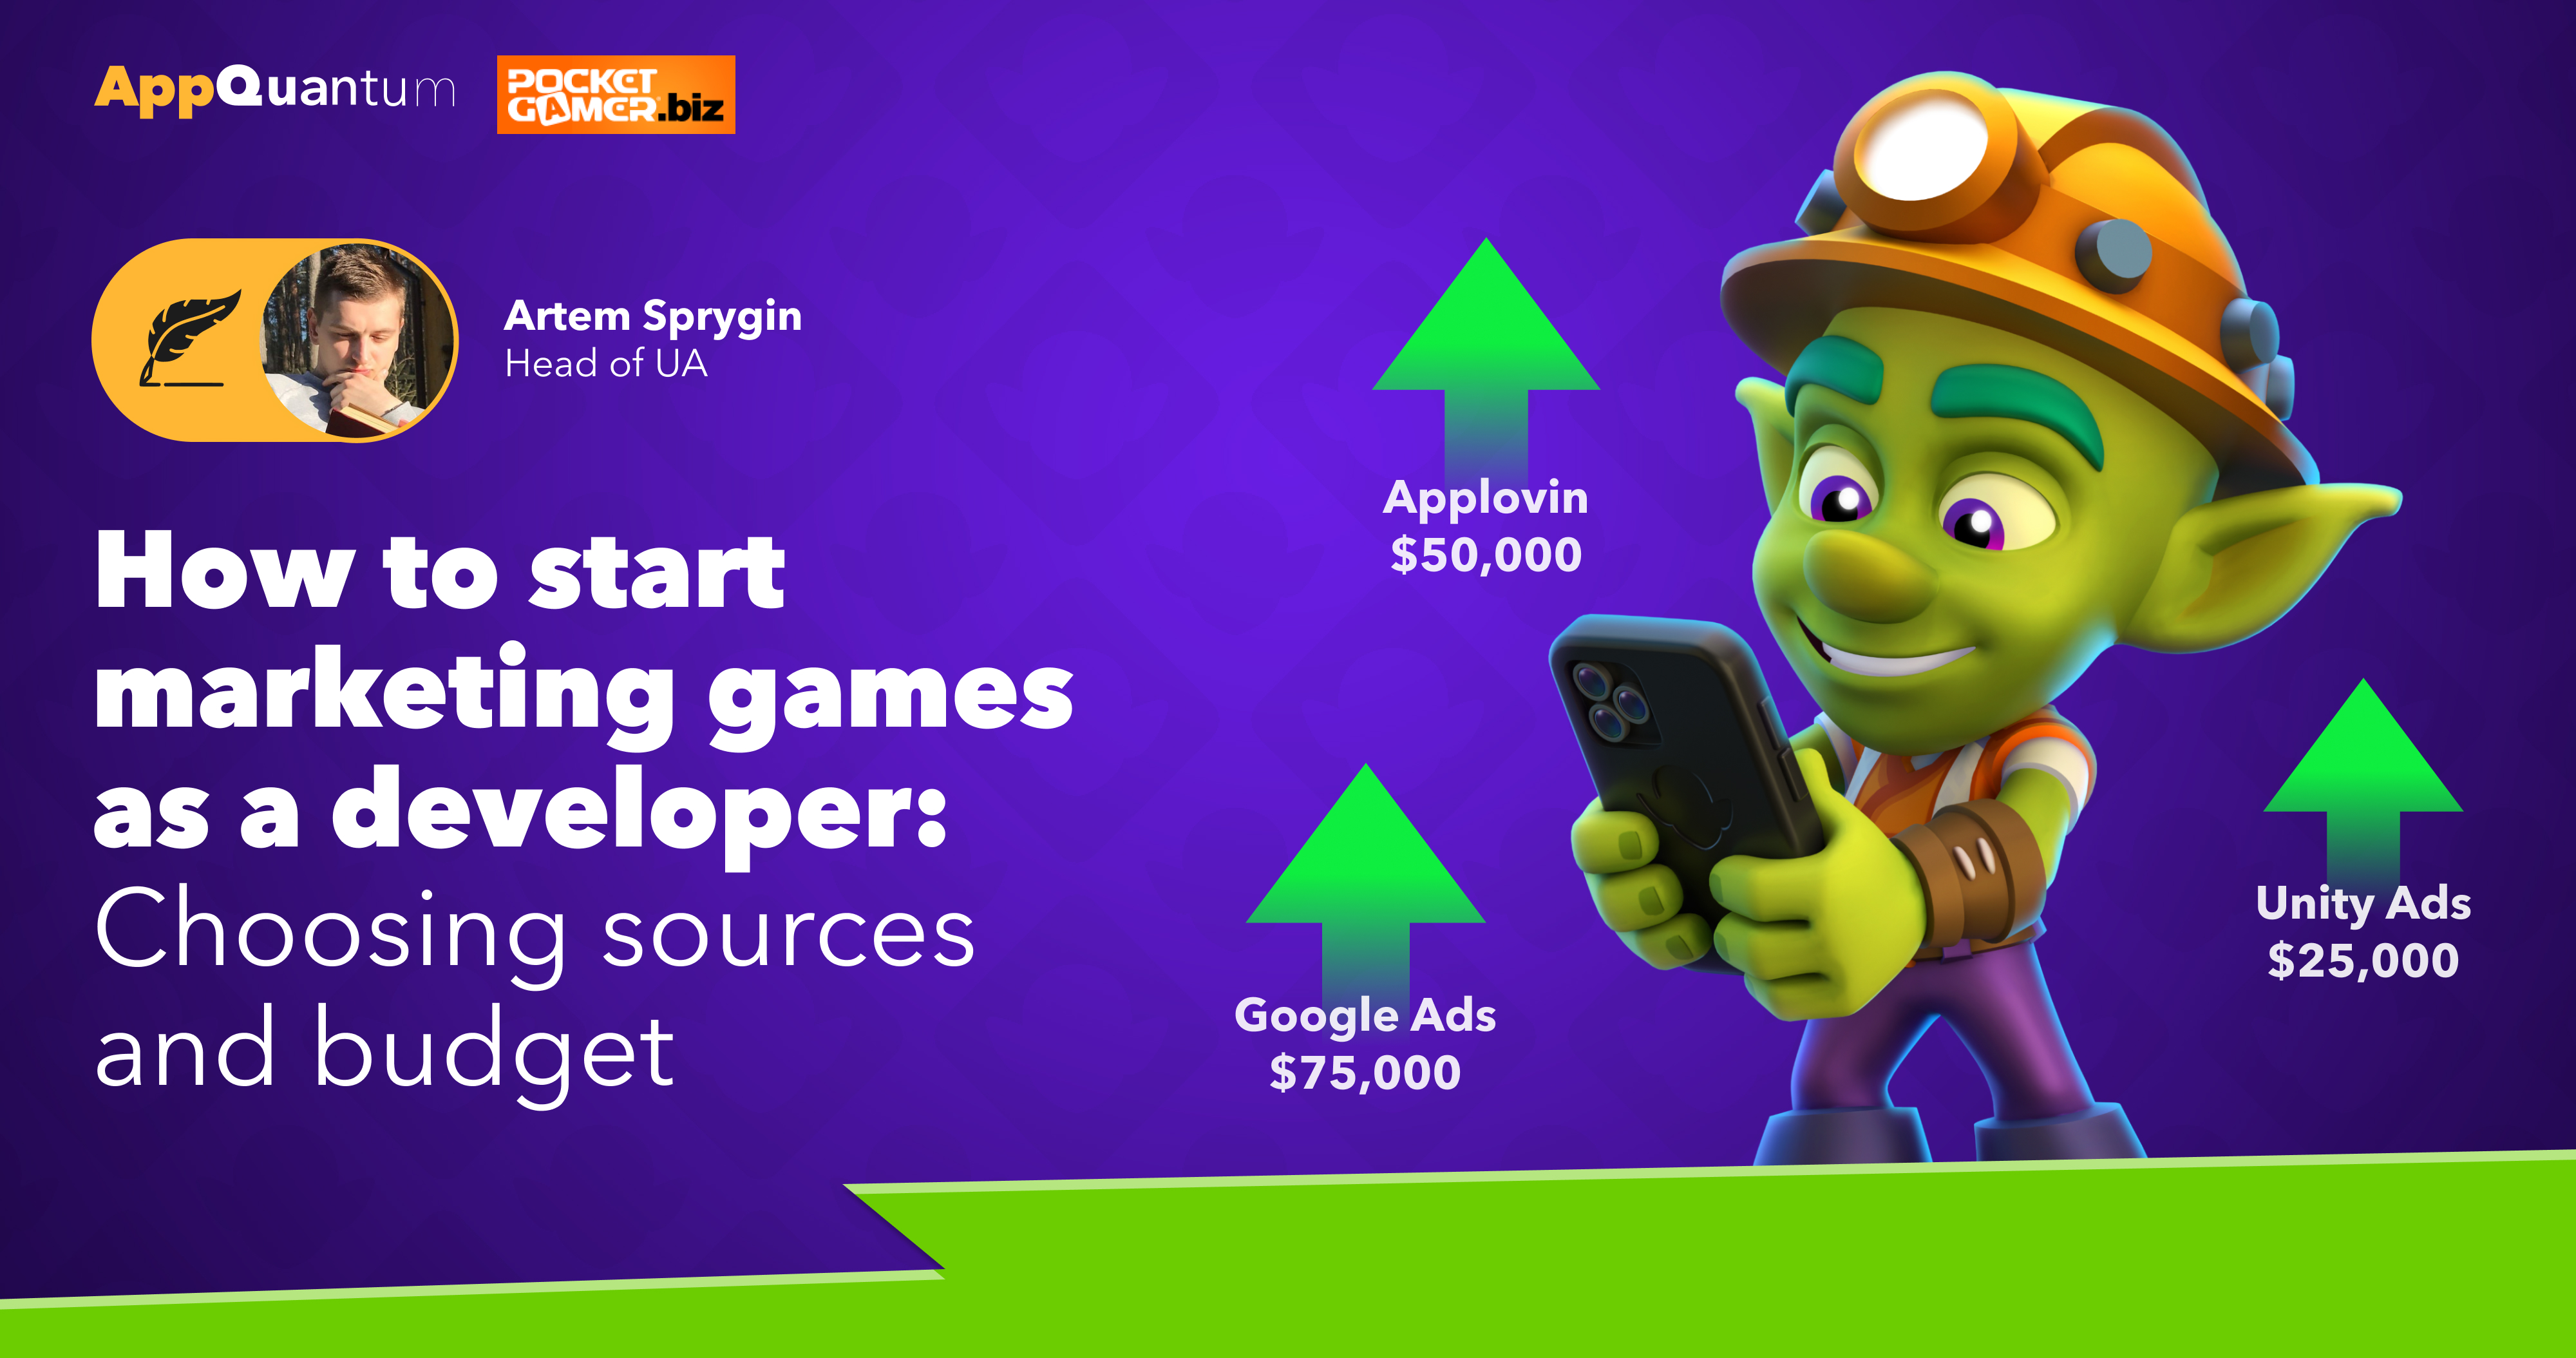 How to Start Marketing Games as a Developer: Choosing Sources and Budget